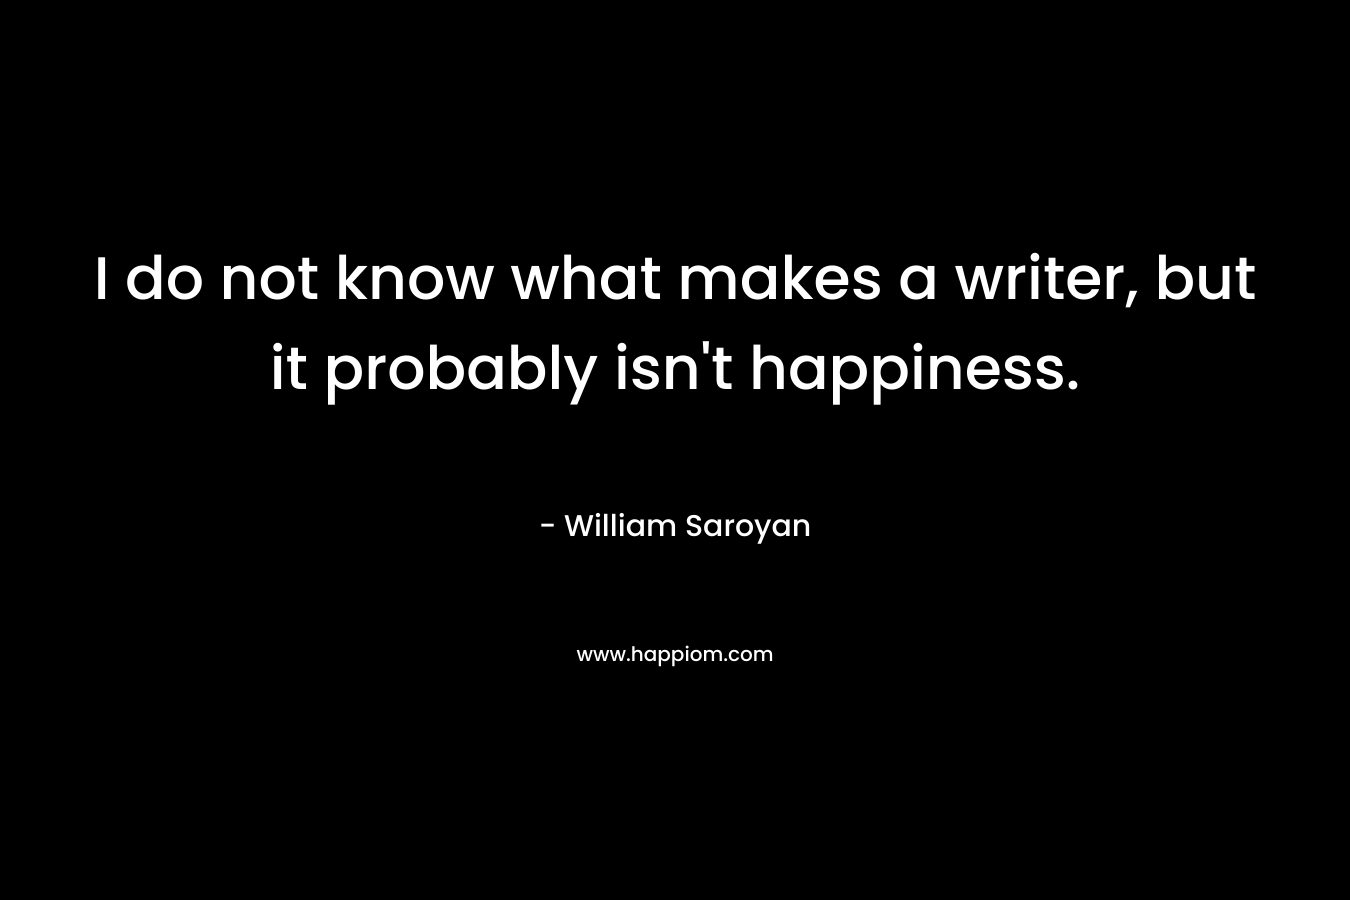 I do not know what makes a writer, but it probably isn't happiness.